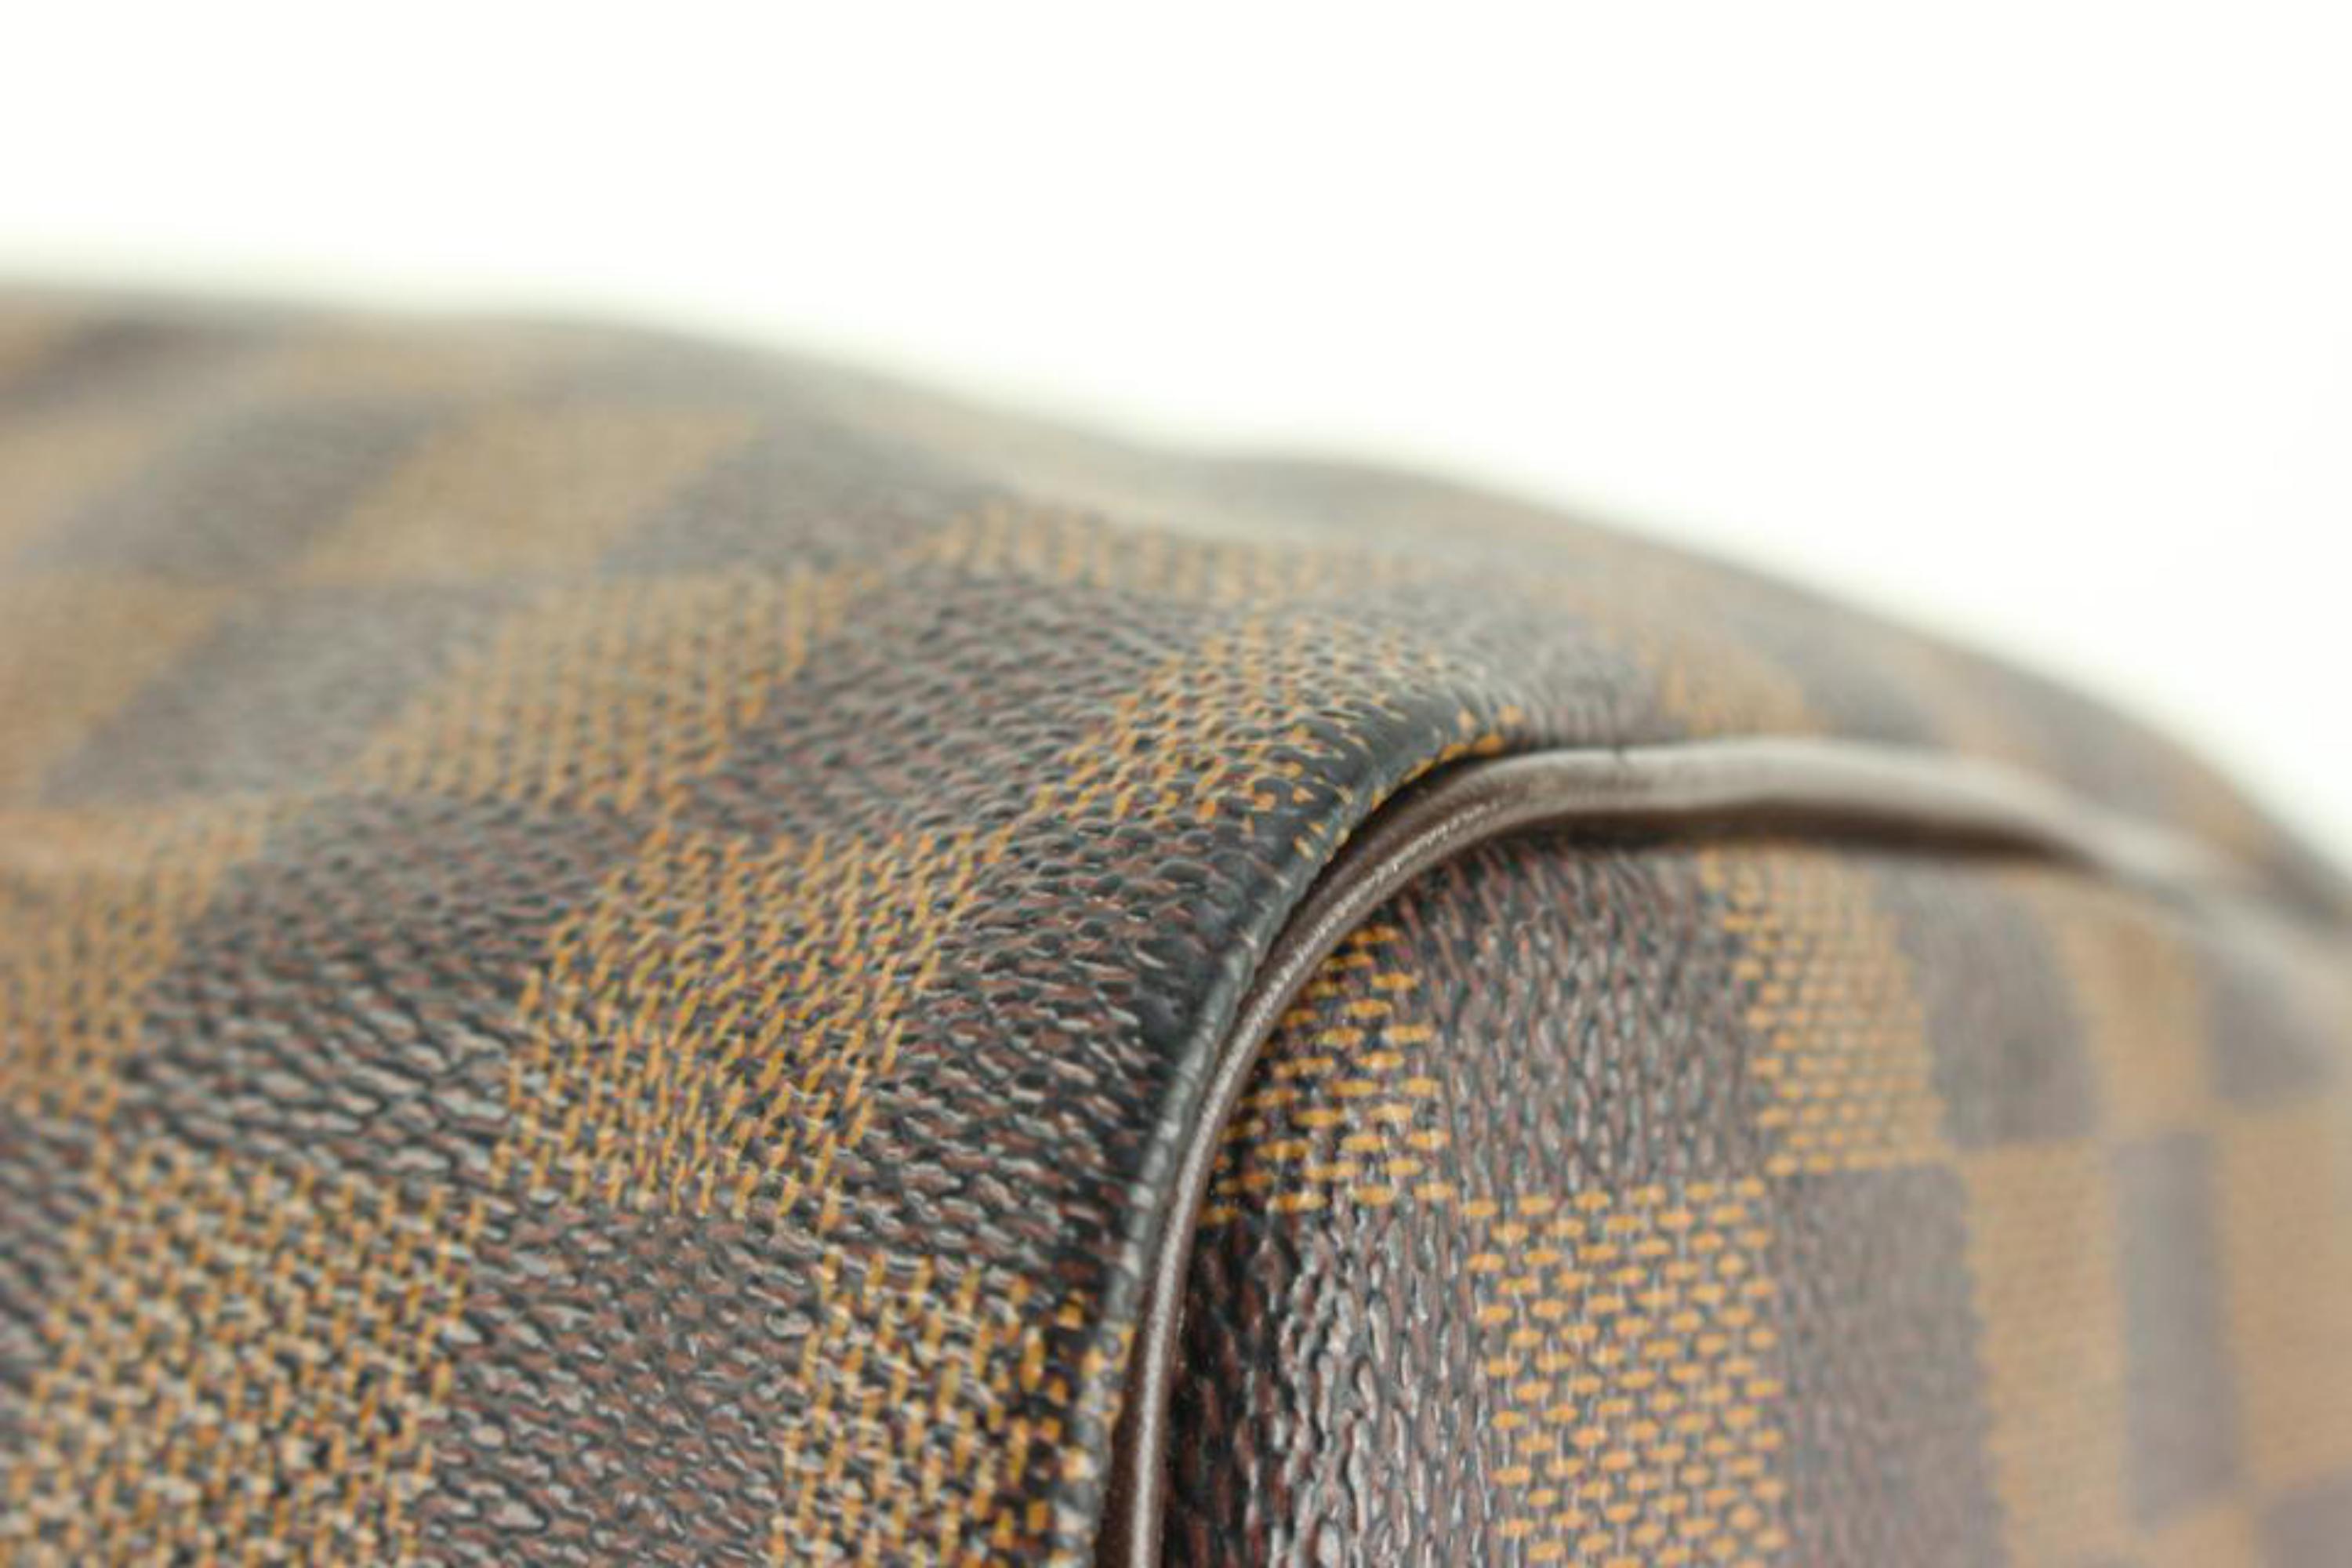 Louis Vuitton Damier Ebene Speedy 30 Boston Bag 49lv518s In Good Condition For Sale In Dix hills, NY